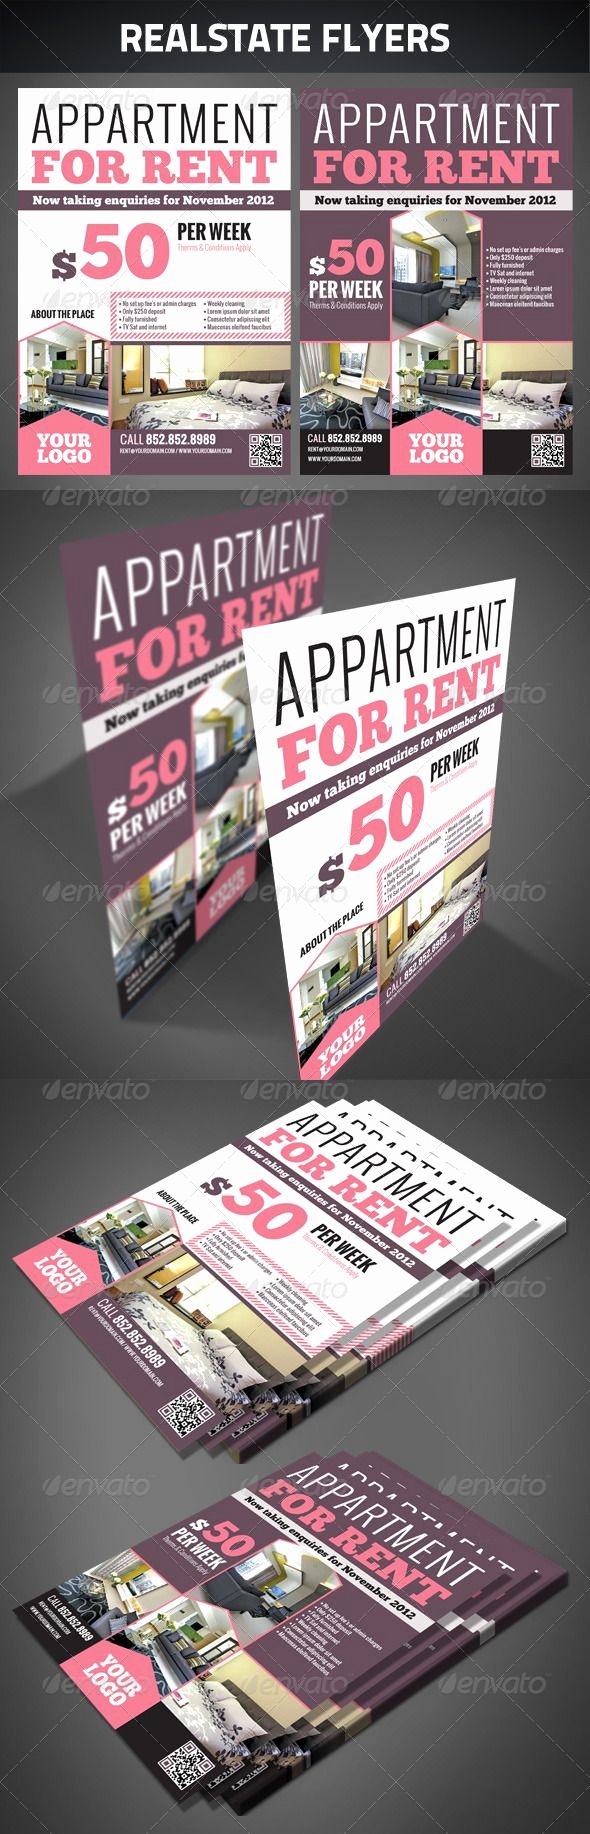 For Rent Flyer Template Best Of Realestate Flyers Graphicriver Realestate Flyers Zip File Contains 2 Psd File Layered Print